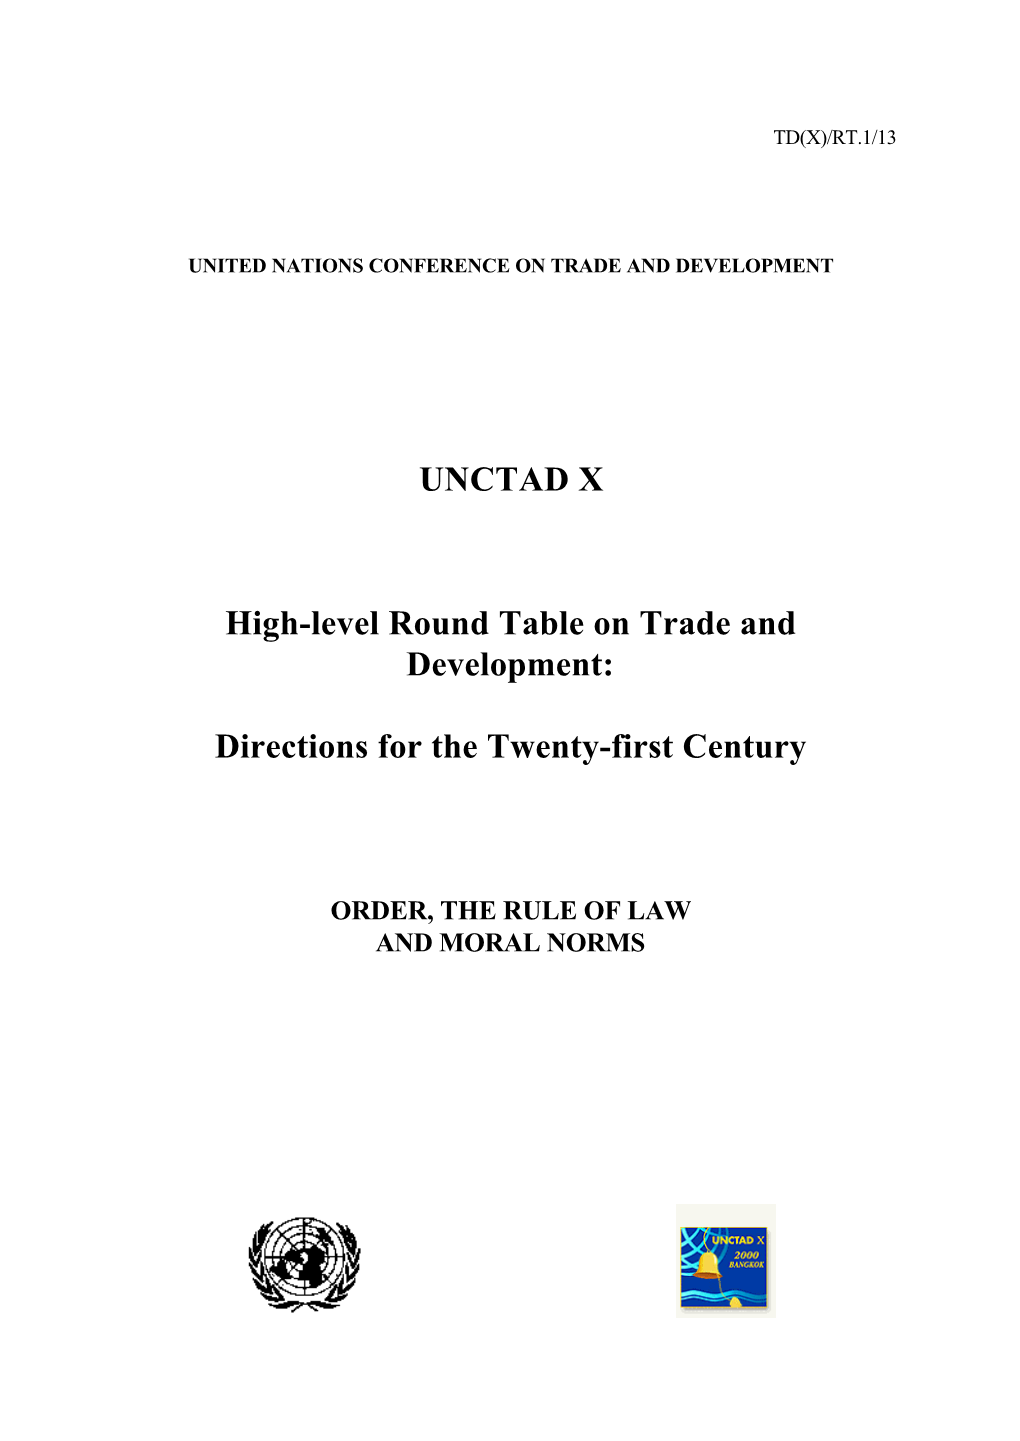 UNCTAD X High-Level Round Table on Trade and Development: Directions for the Twenty-First Century